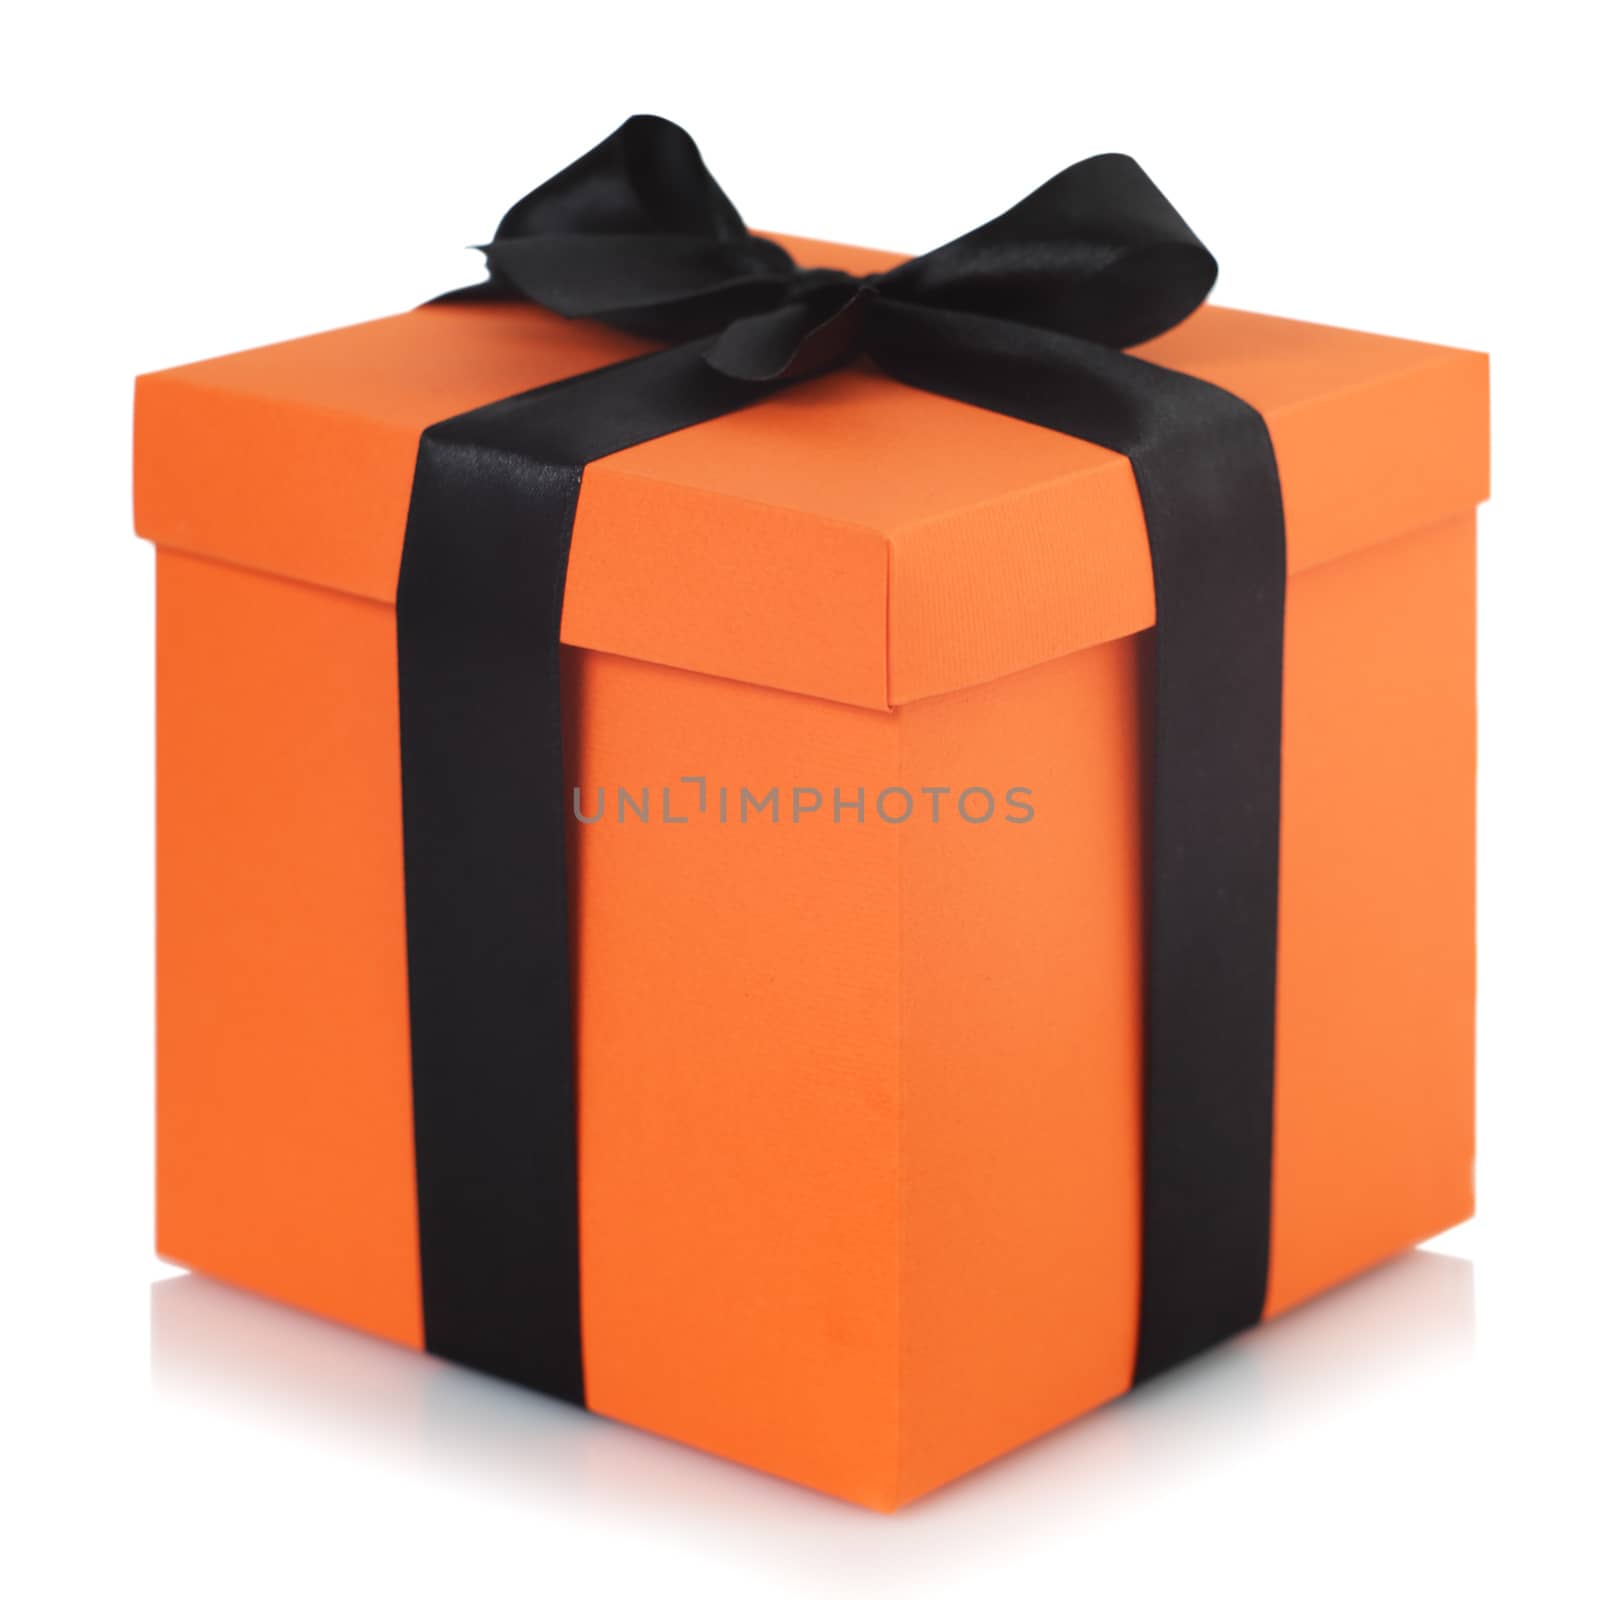 Decorated black and orange halloween gift box isolated on white background with reflection